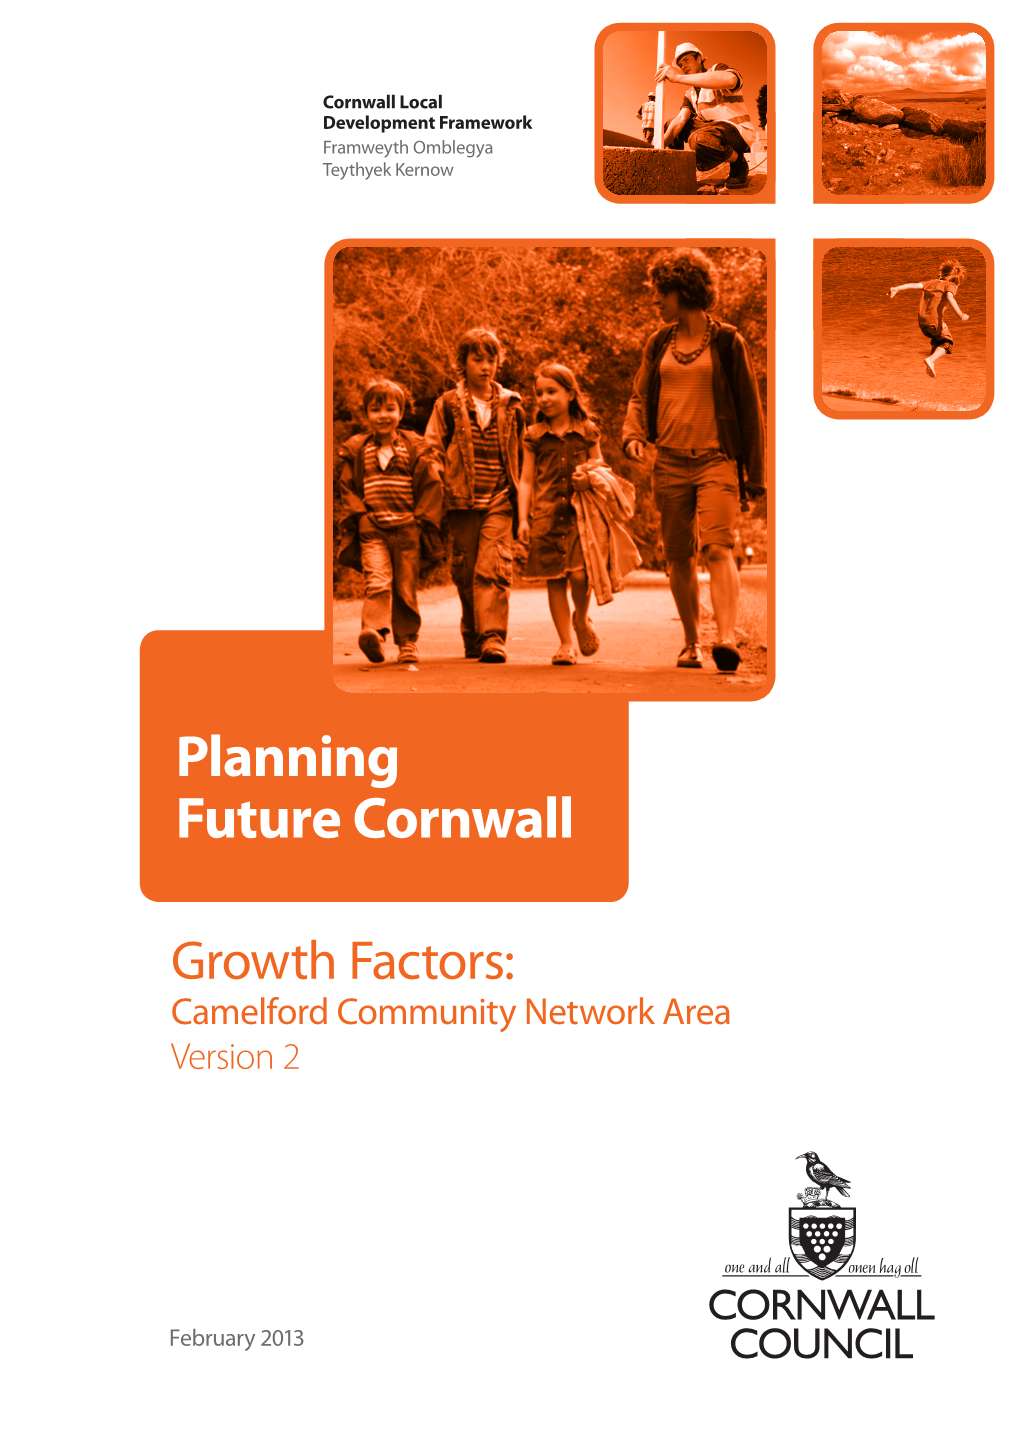 Camelford Community Network Area Version 2